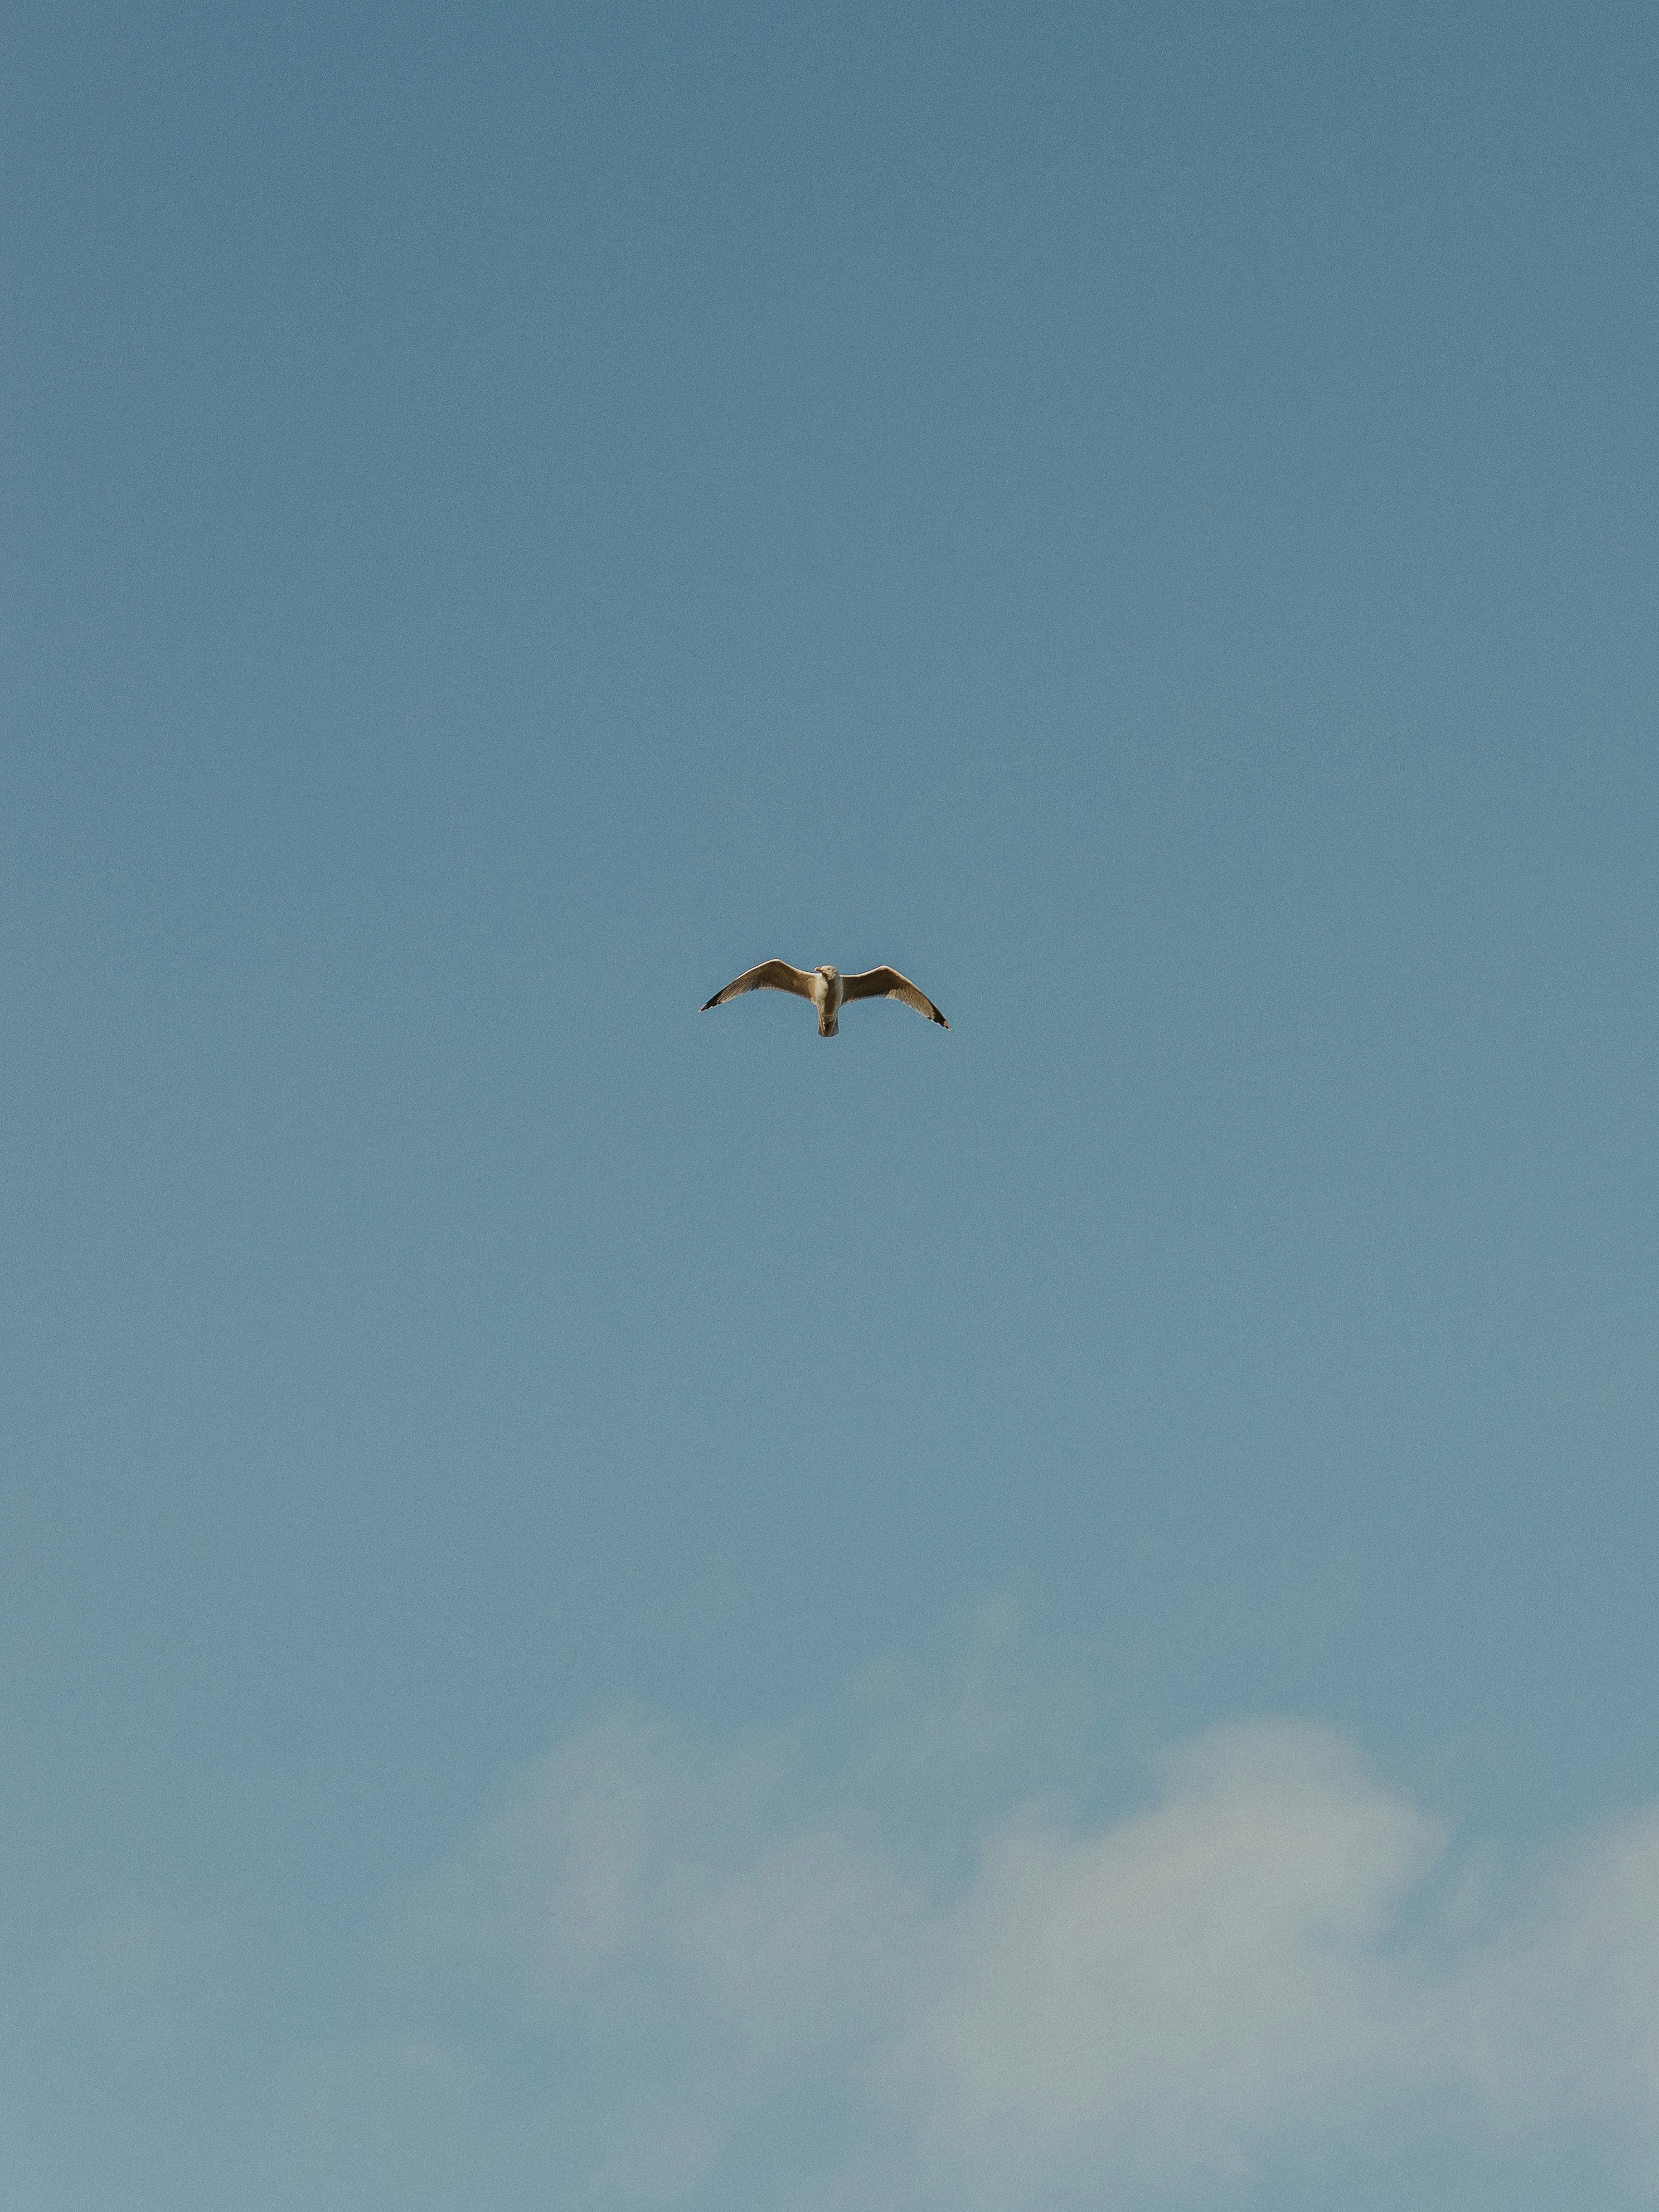 Tried my best to get a bird shot with my fixed 80mm